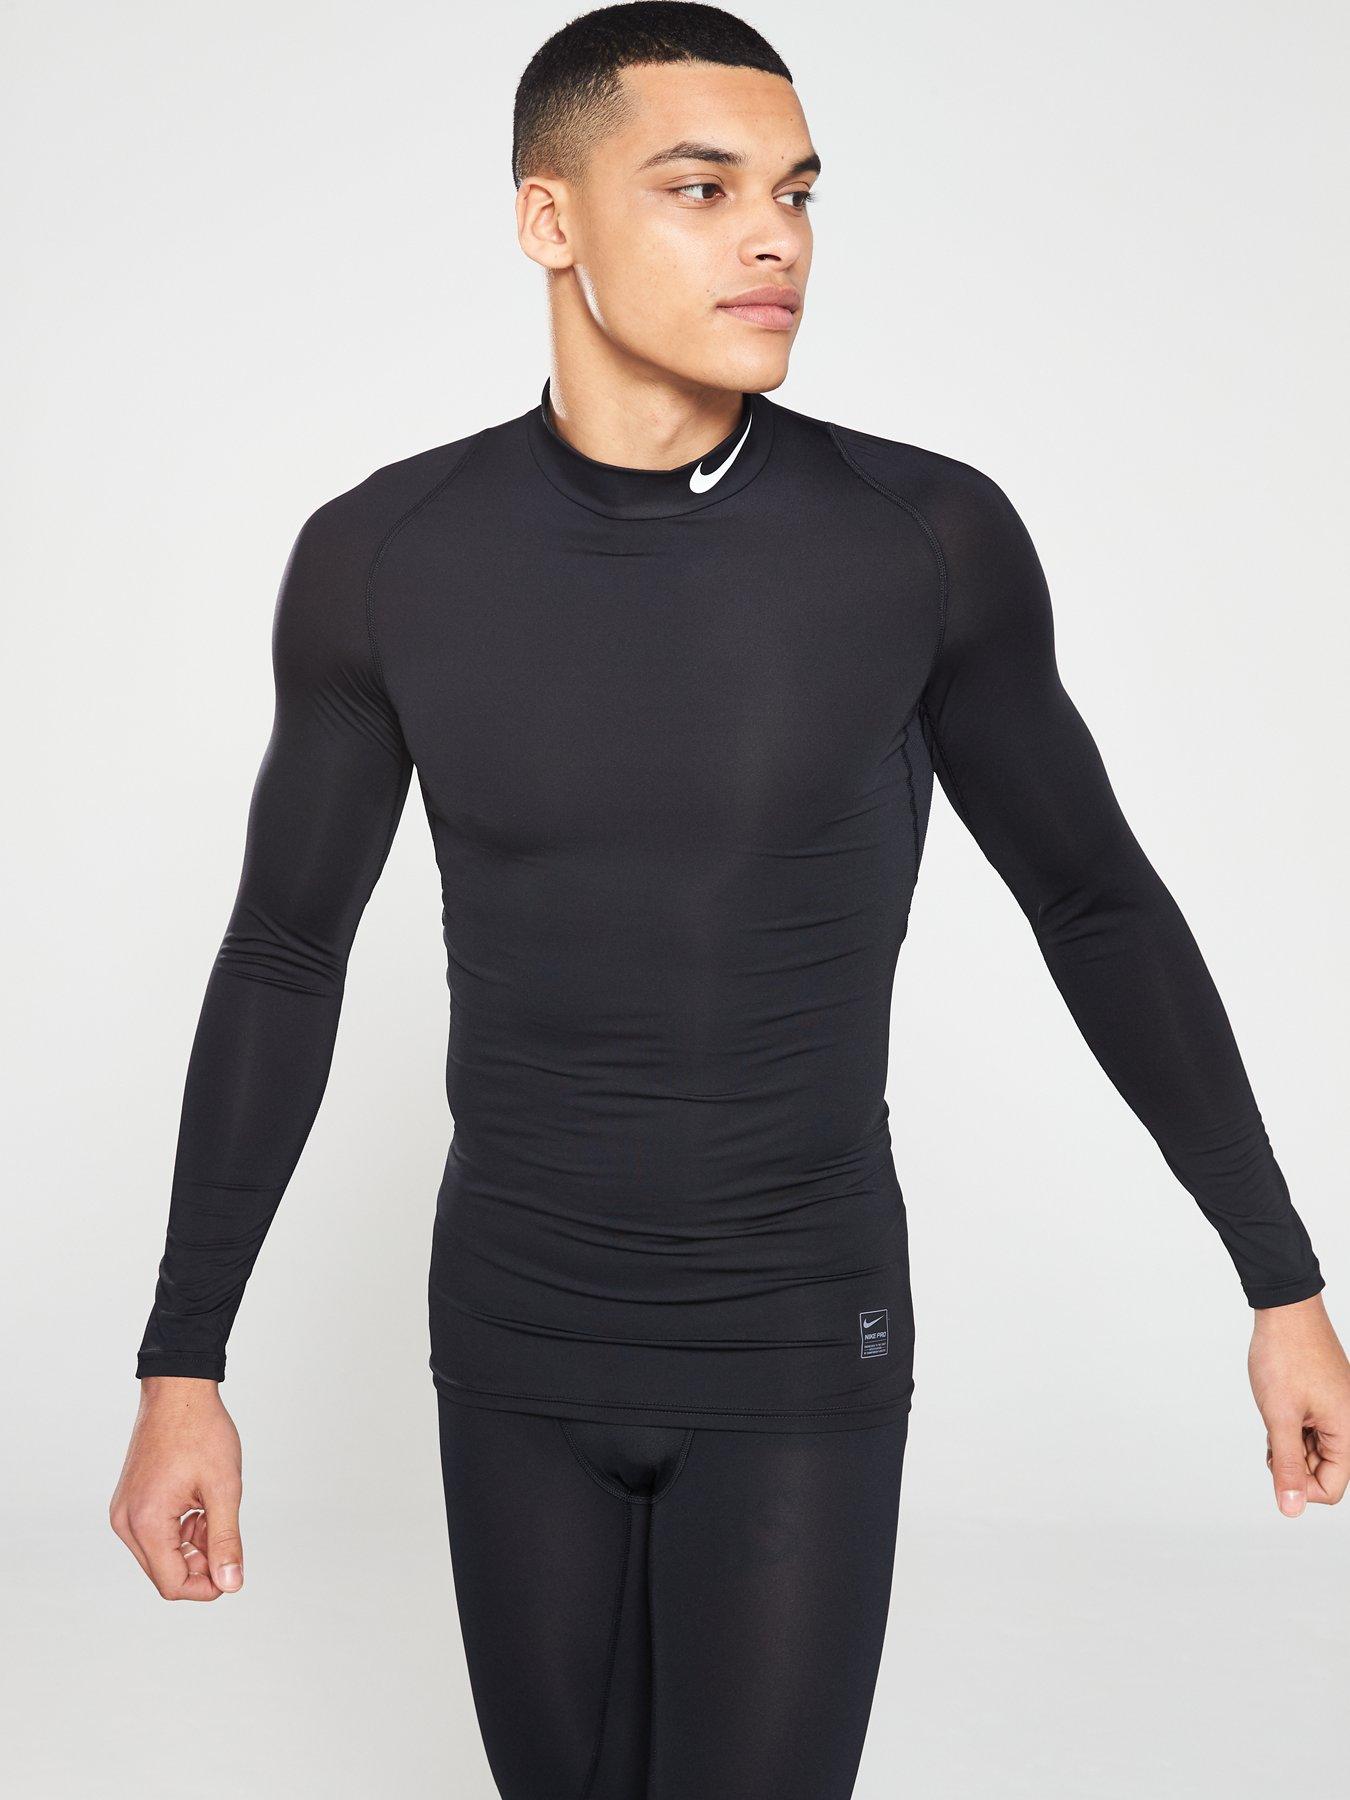 New 199 Black Skin Tights Compression Base Layer Running Long Sleeve Top Mens